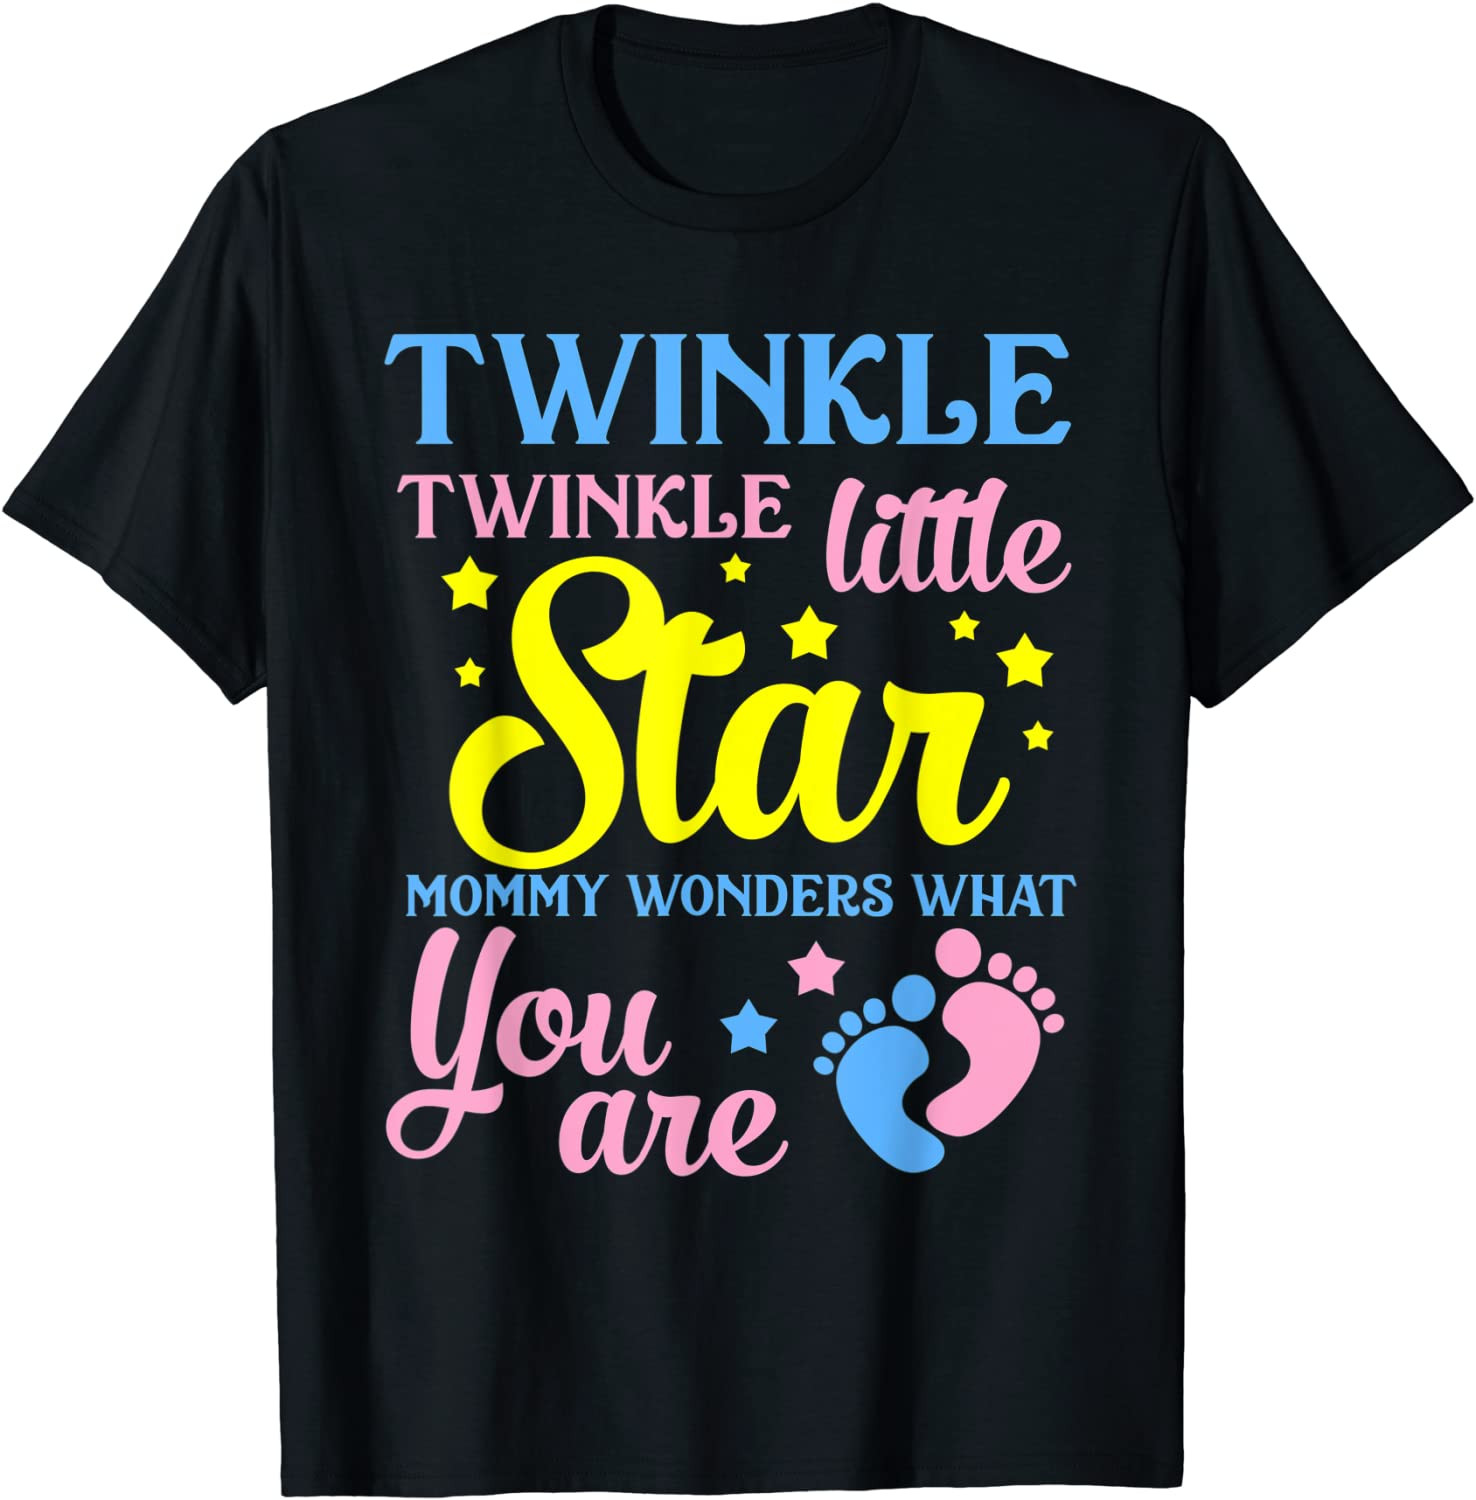 Twinkle Little Star Mommy Wonders What You Are Gender Reveal